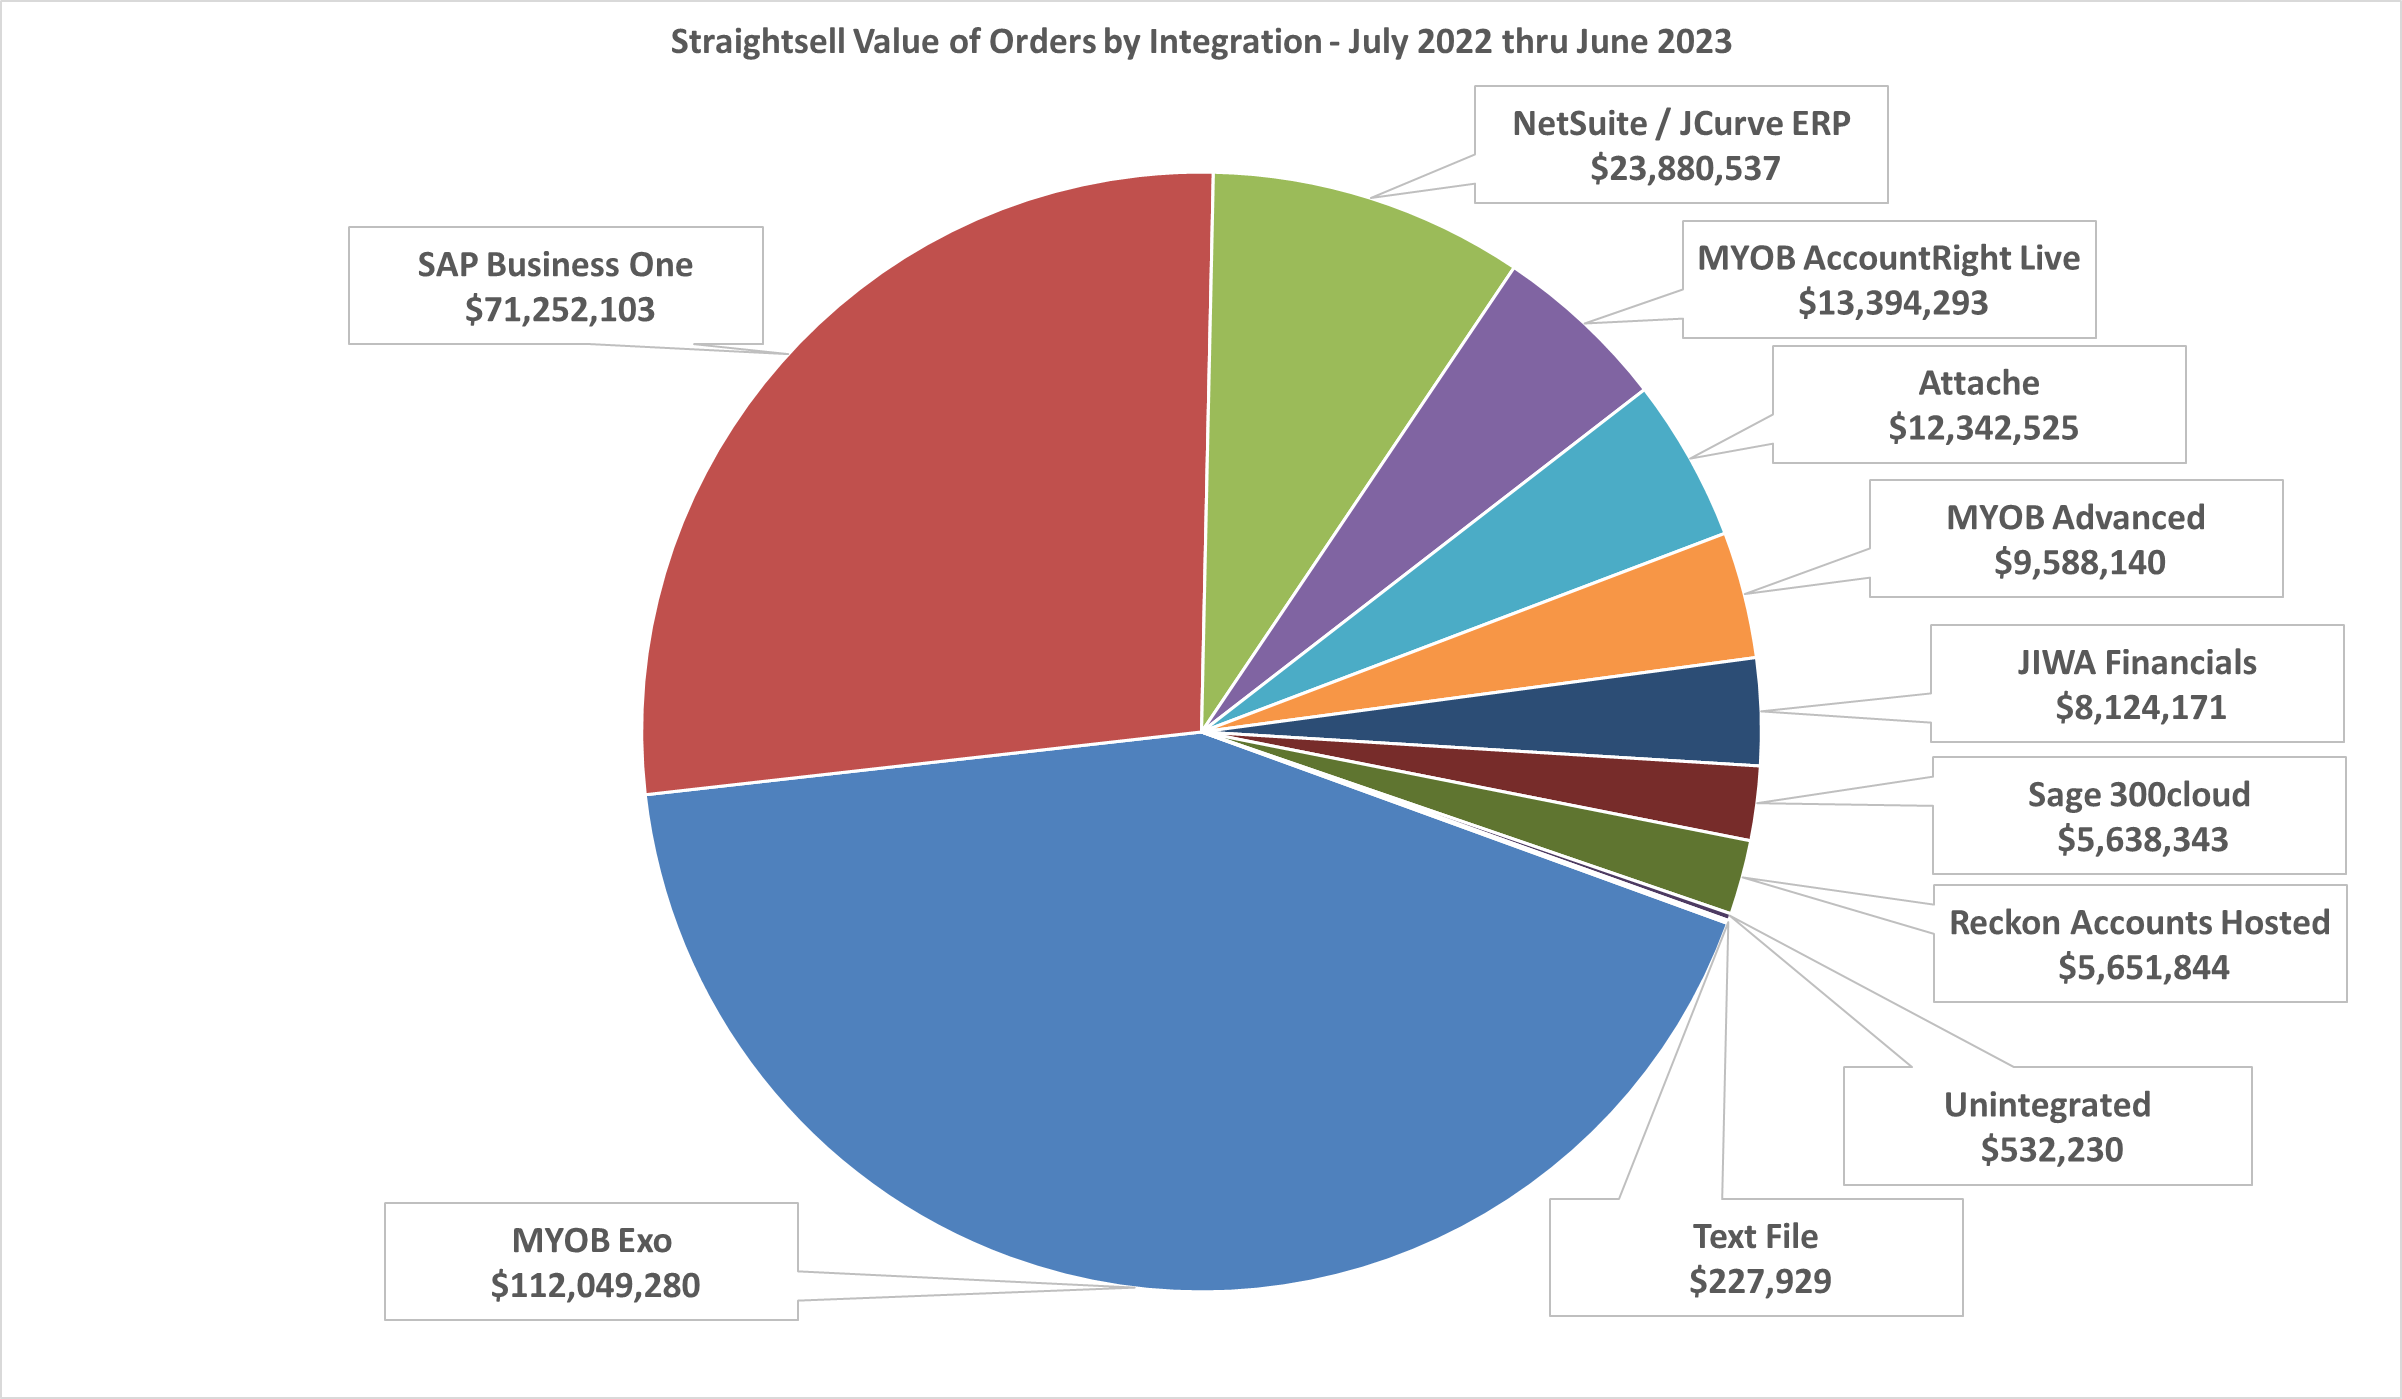 Straightsell Value of Orders by Integration - July 2022 thru June 2023